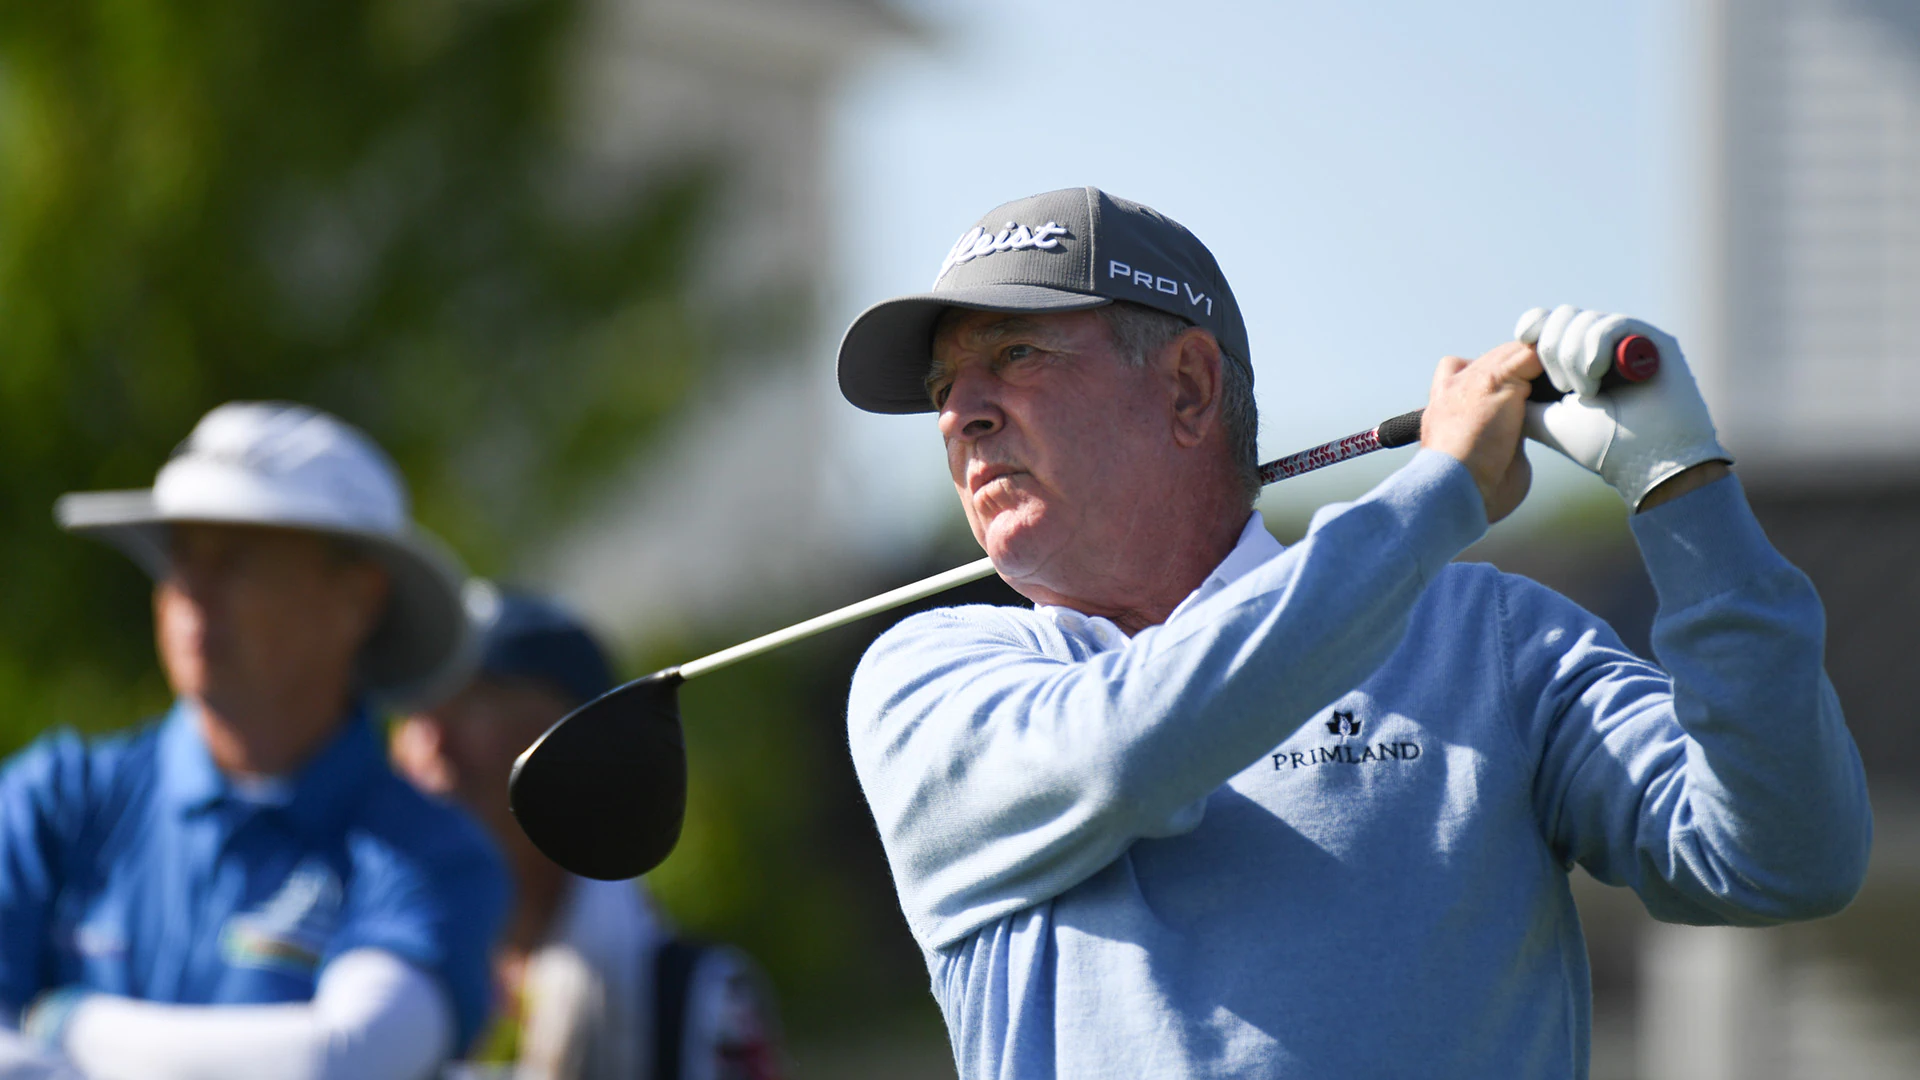 Jay Haas beats his age and shares the lead at U.S. Senior Open